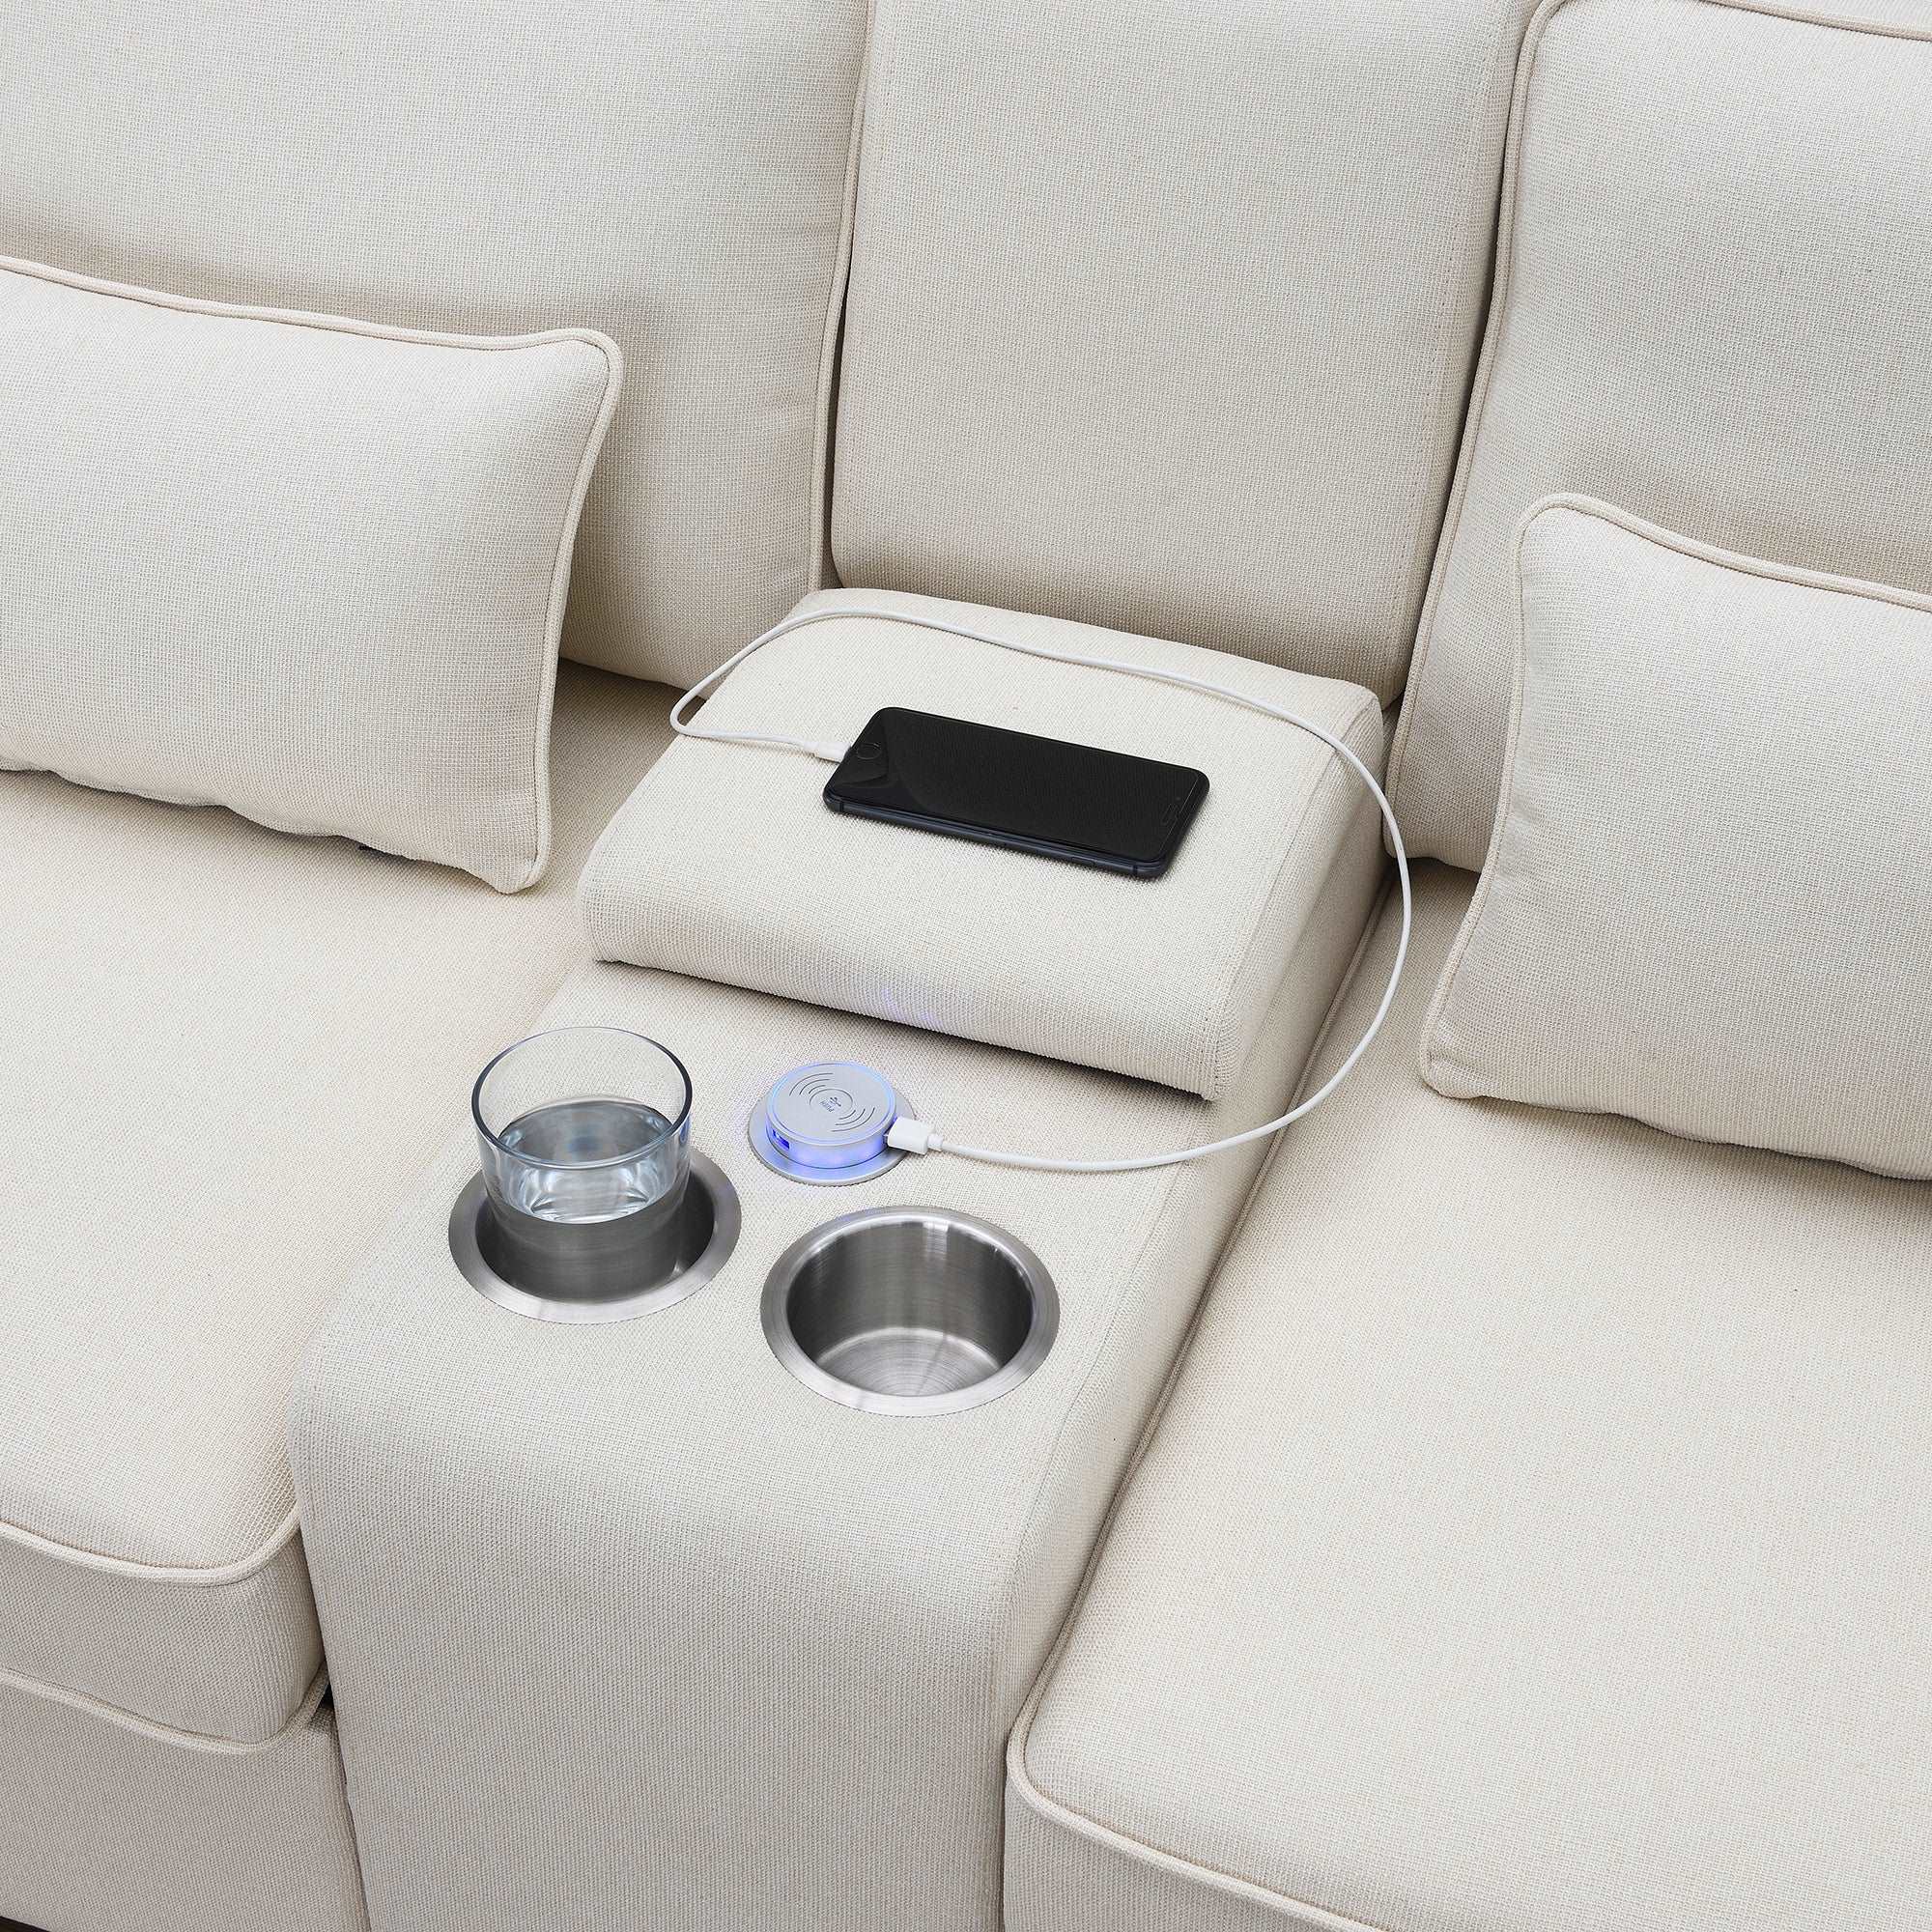 Bellemave 114.2" Upholstered Sofa with Console and 2 Cupholders,2 USB Ports and 4 Pillows